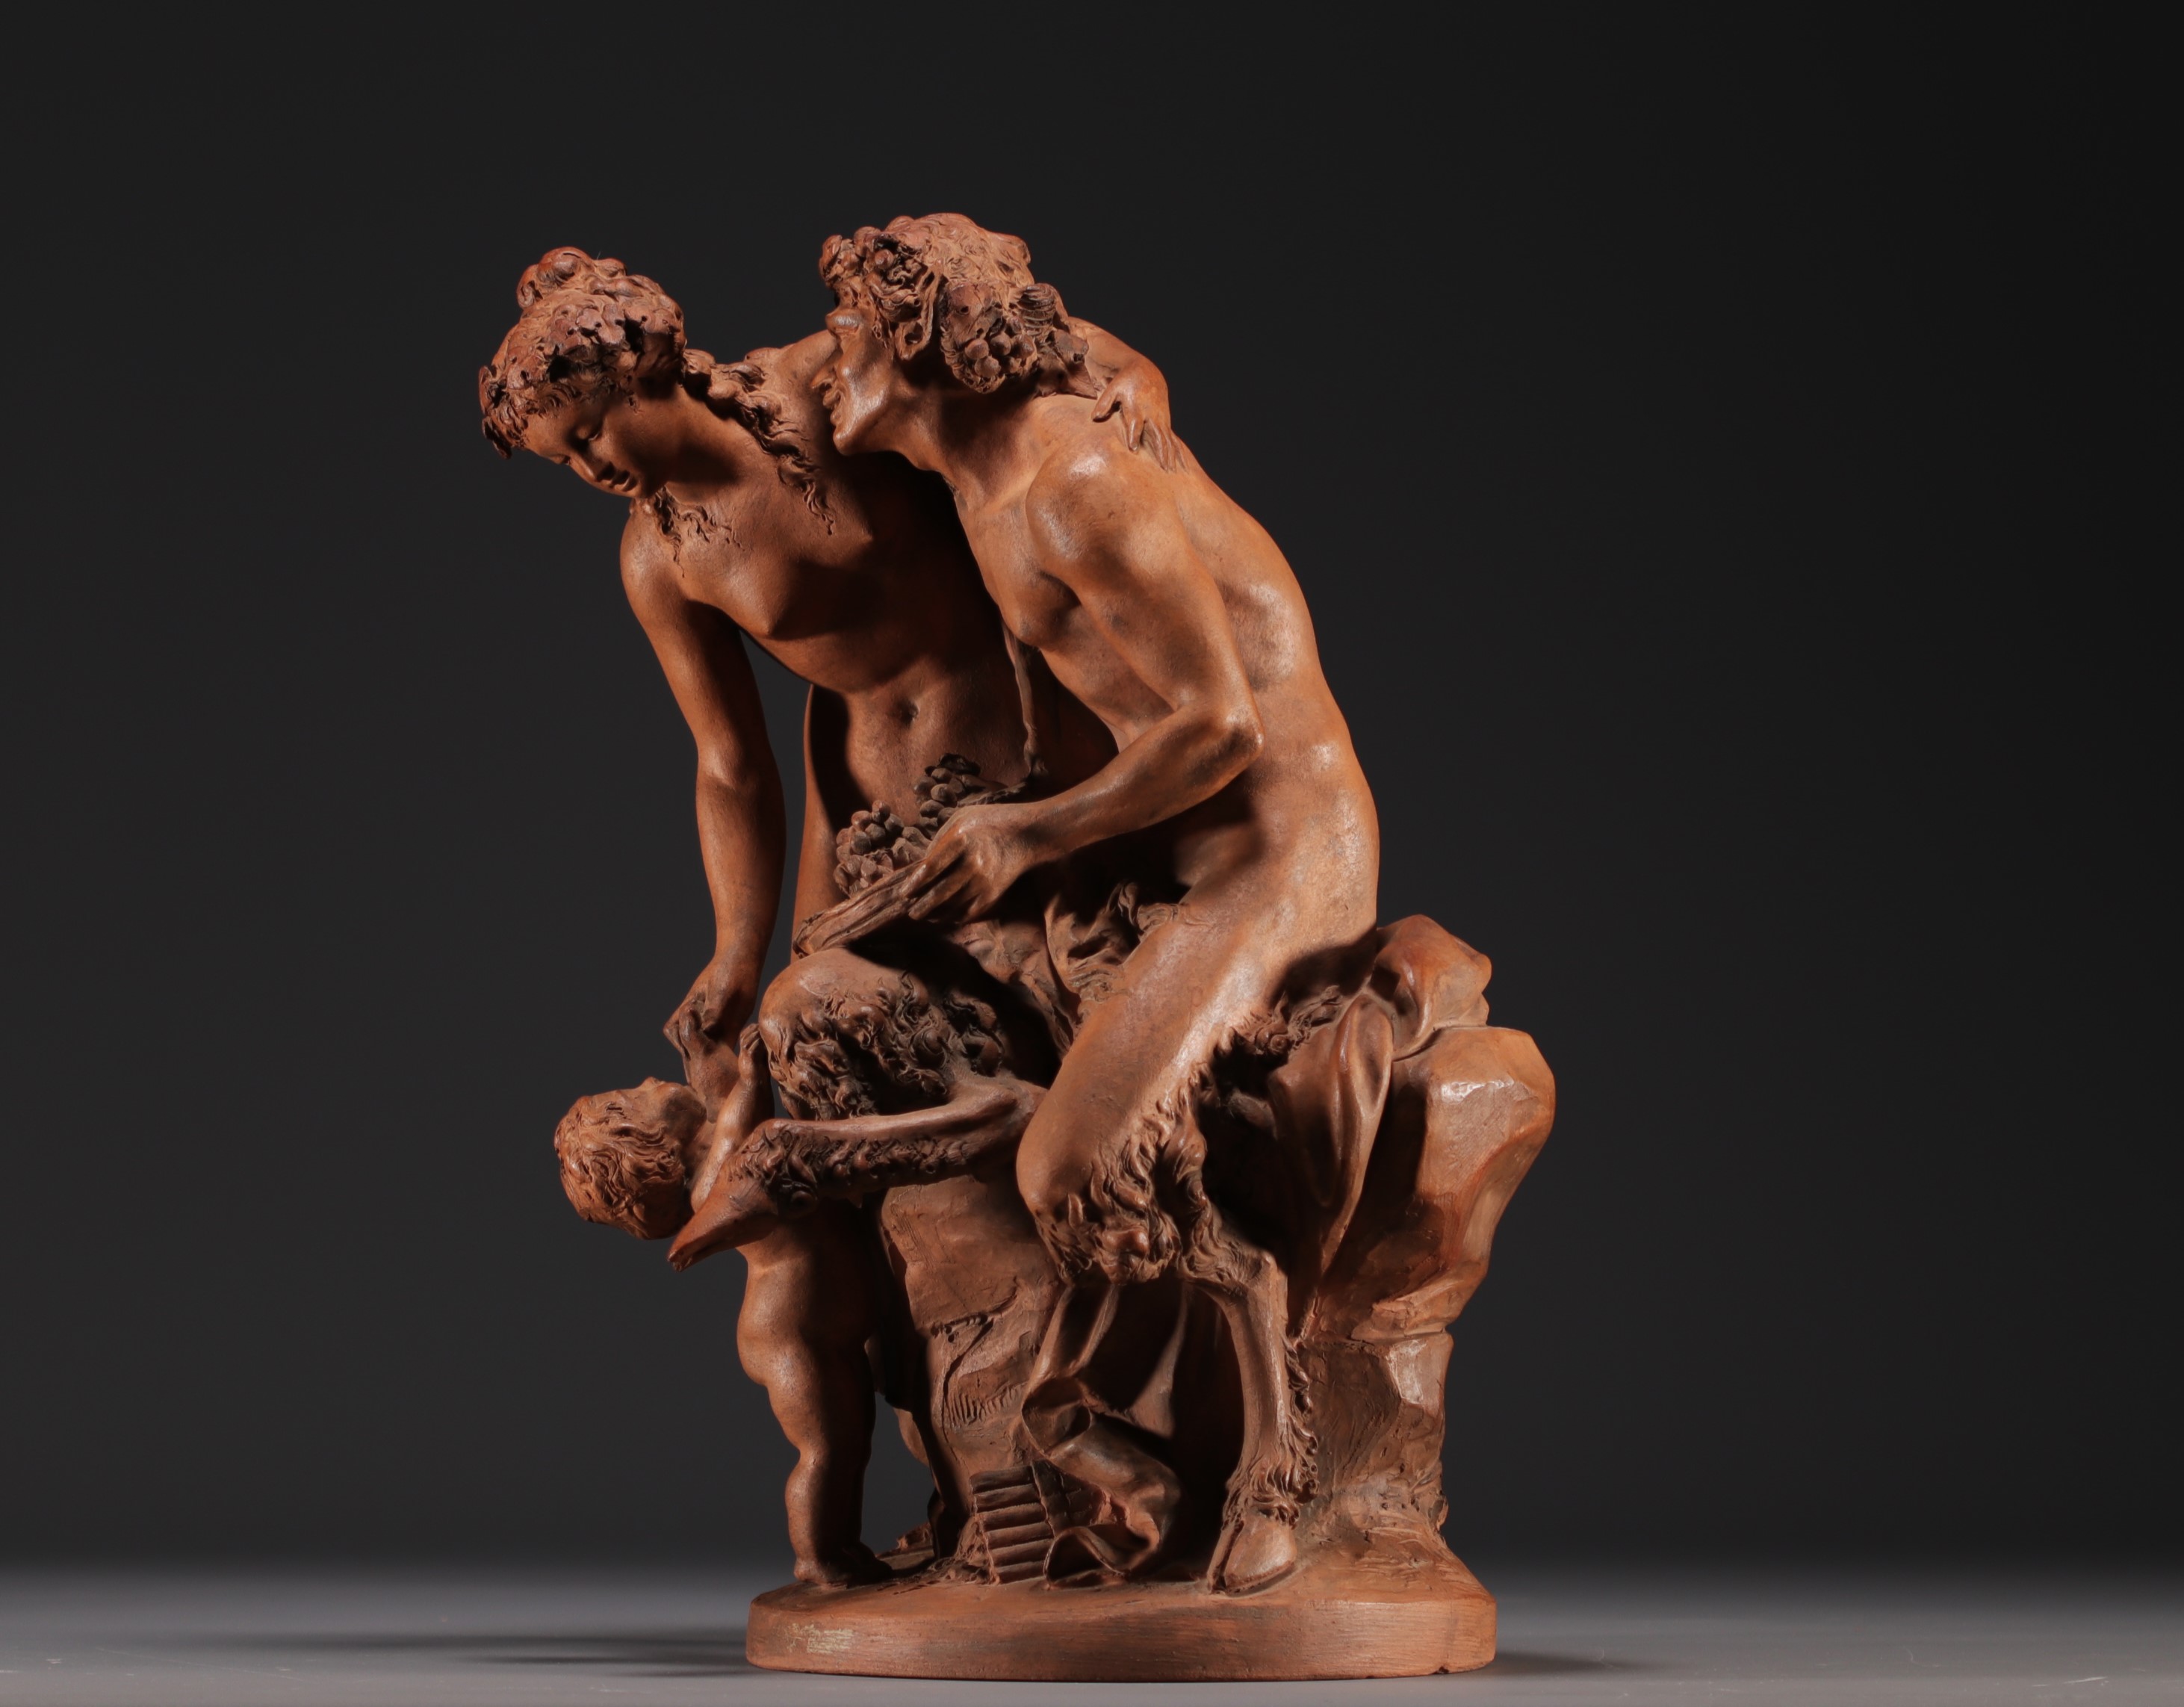 Claude Michel CLODION (1738-1814) after, "Nymph and Faun", terracotta sculpture.